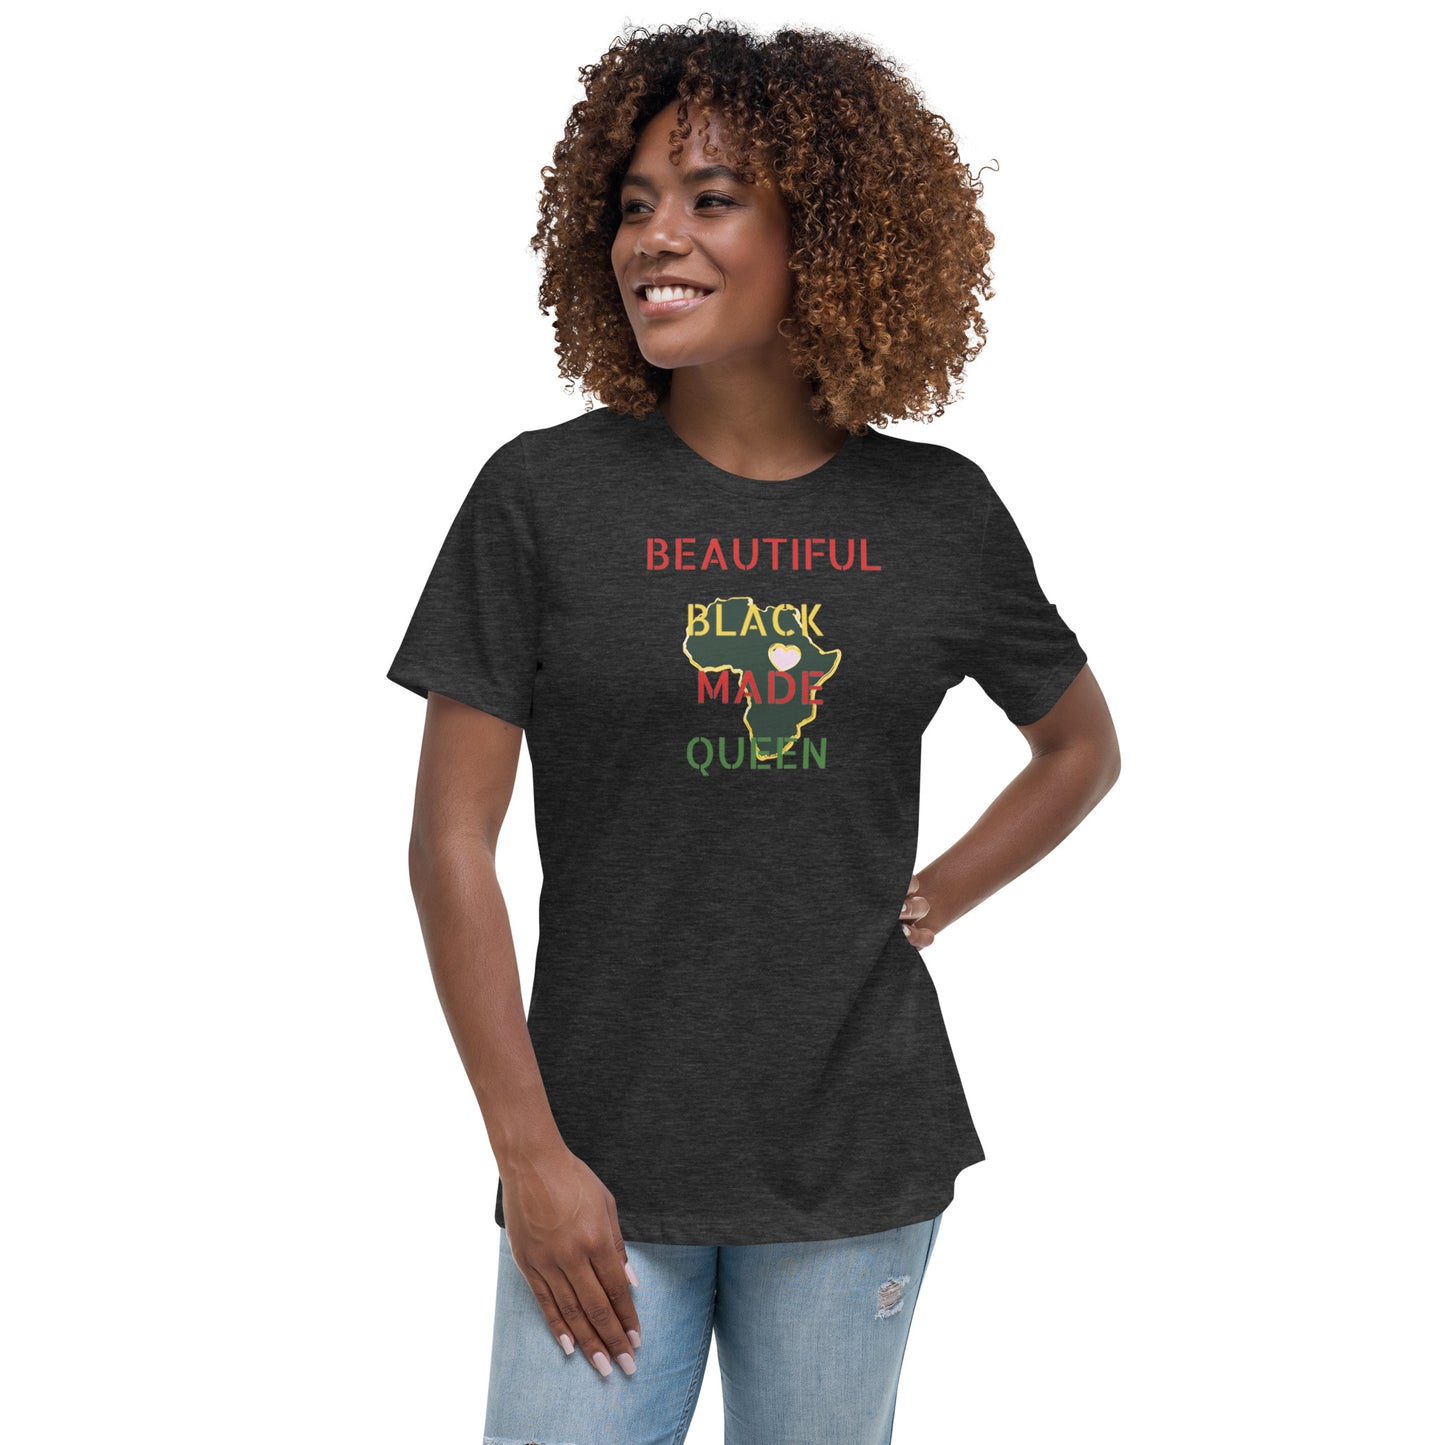 Queen Relaxed History T-Shirt